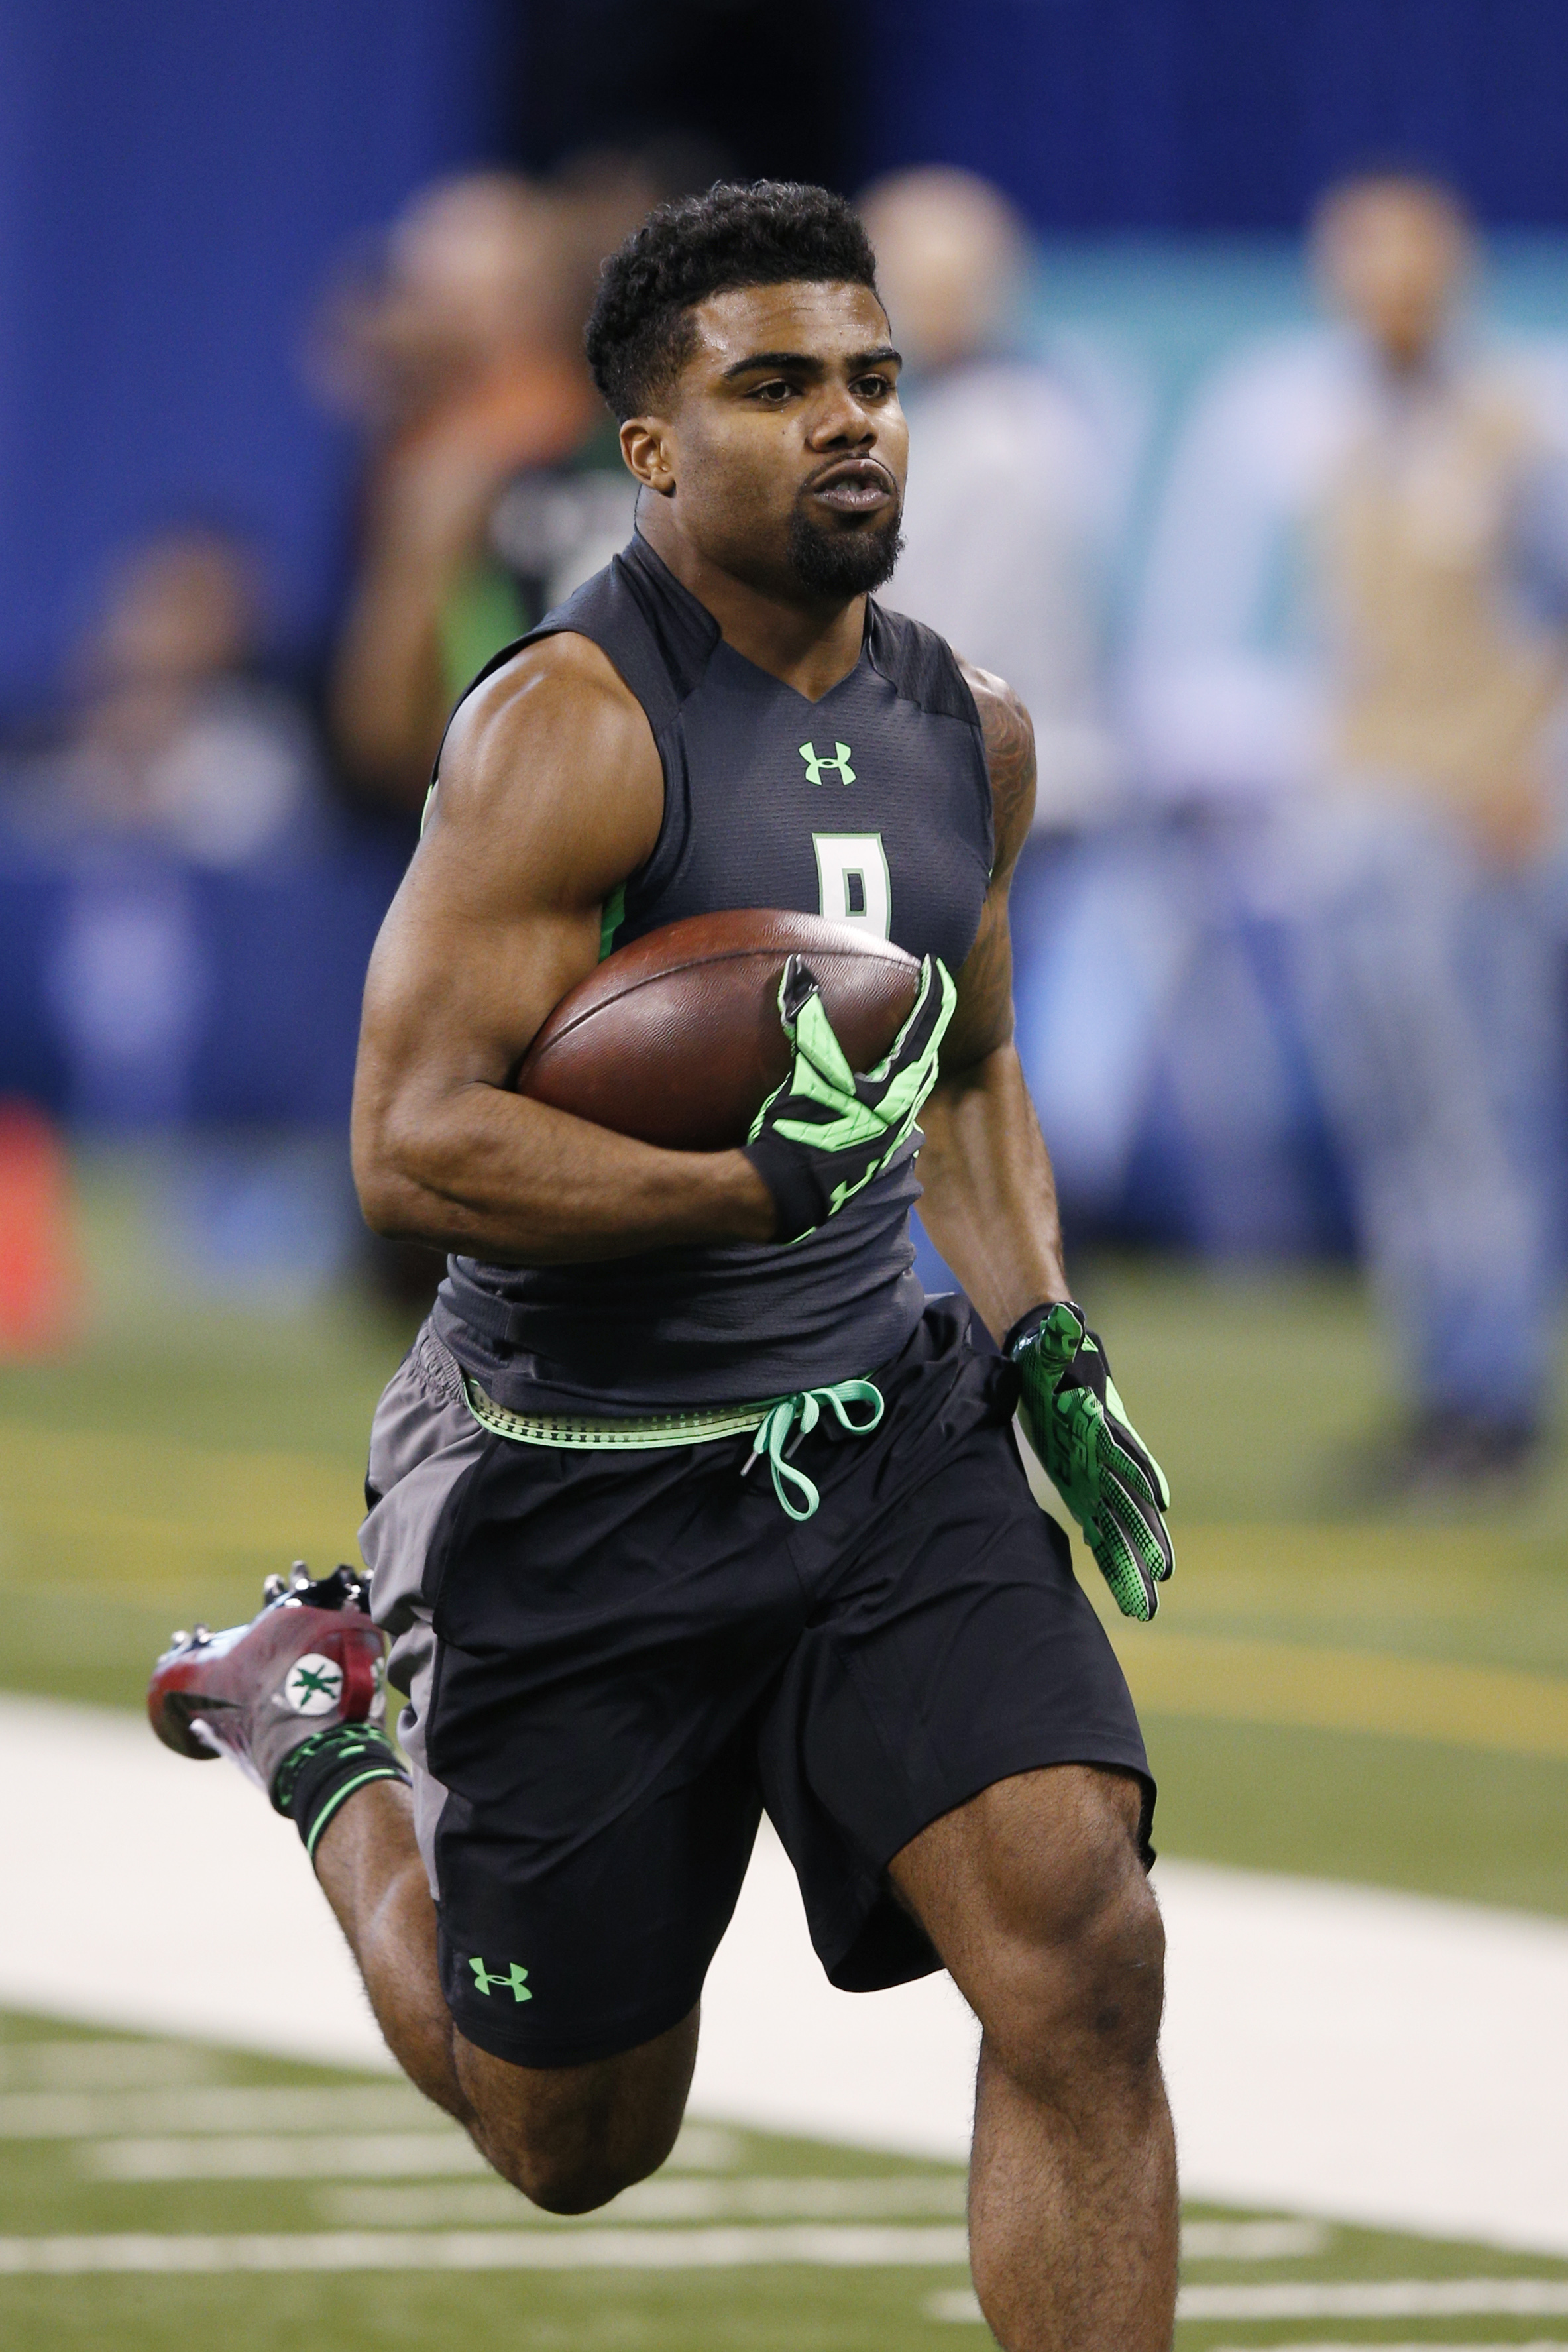 INDIANAPOLIS, IN - FEBRUARY 26: Running back Ezekiel Elliott of Ohio State runs with the ball during the 2016 NFL Scouting Combine at Lucas Oil Stadium on February 26, 2016 in Indianapolis, Indiana. (Photo by Joe Robbins/Getty Images)